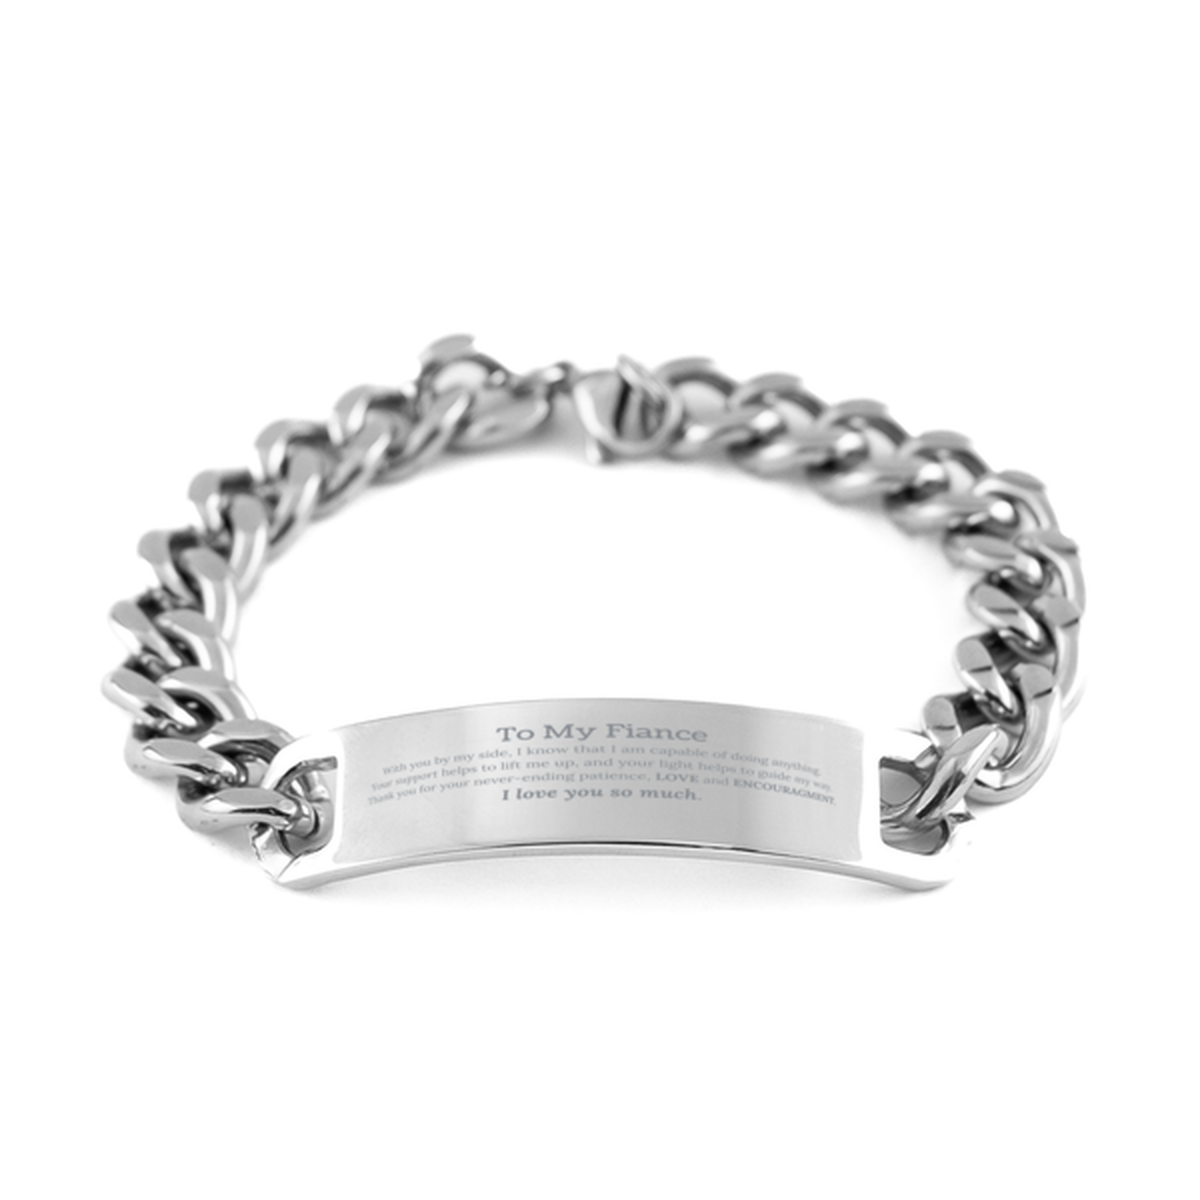 Appreciation Fiance Cuban Chain Stainless Steel Bracelet Gifts, To My Fiance Birthday Christmas Wedding Keepsake Gifts for Fiance With you by my side, I know that I am capable of doing anything. I love you so much